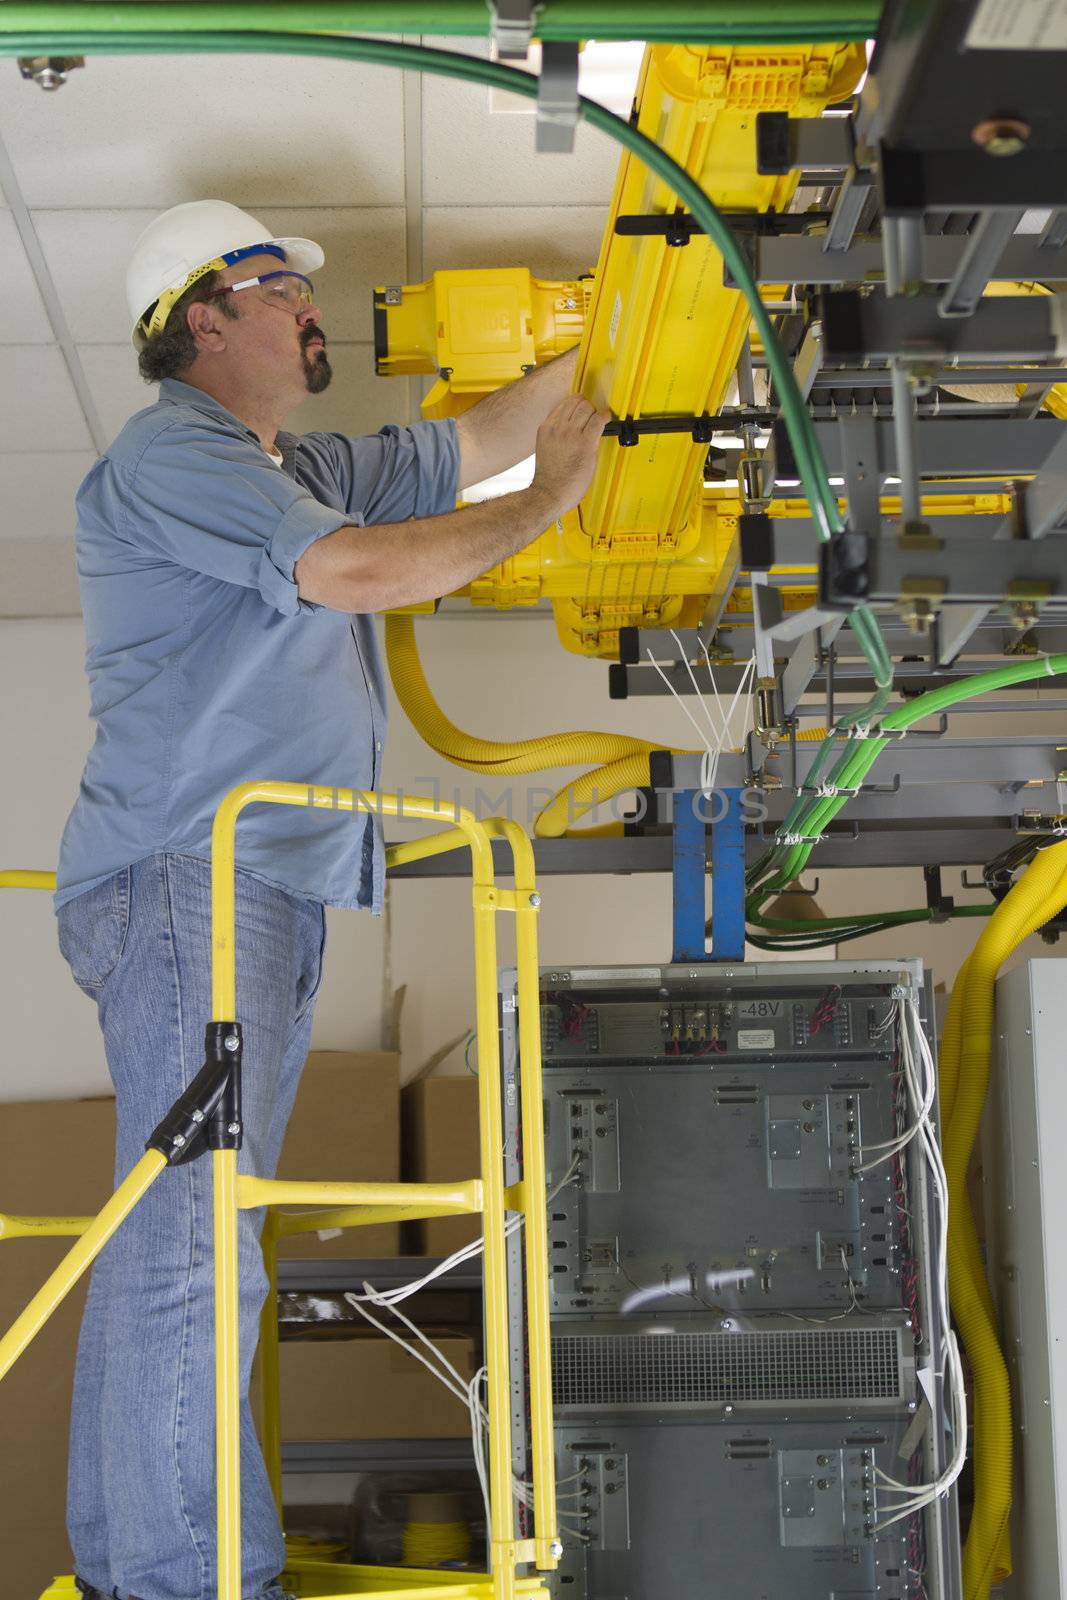 A telecommunication worker inspecting Fiberoptic cables in the fiberduct on a OSHA approved ladder.